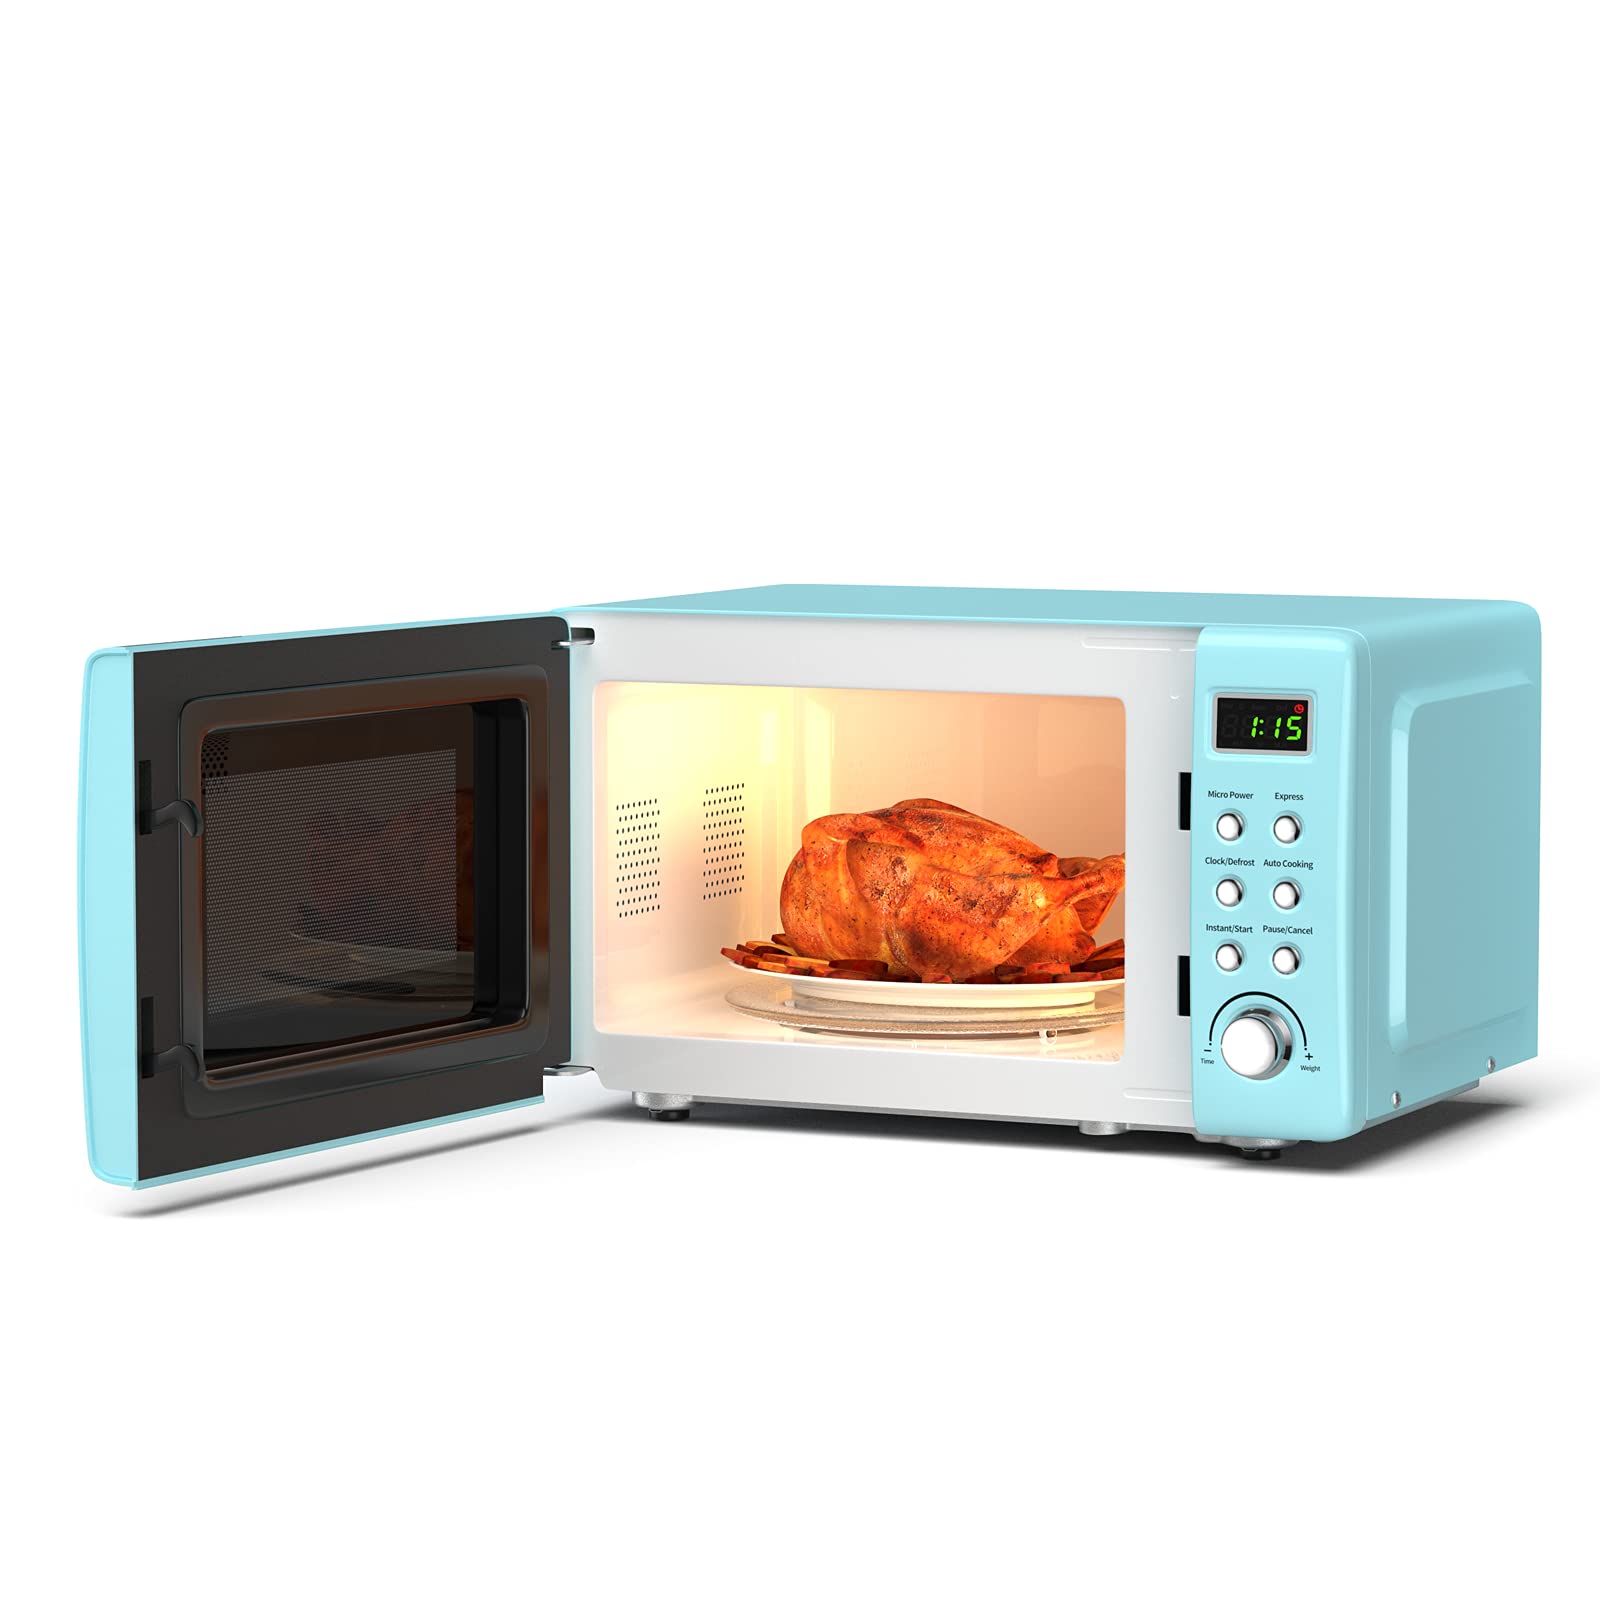 Moccha Compact Retro Microwave Oven, 0.7Cu.ft, 700-Watt Countertop Microwave Ovens w/5 Micro Power, Delayed Start Function, LED Display, Child Lock (Green)